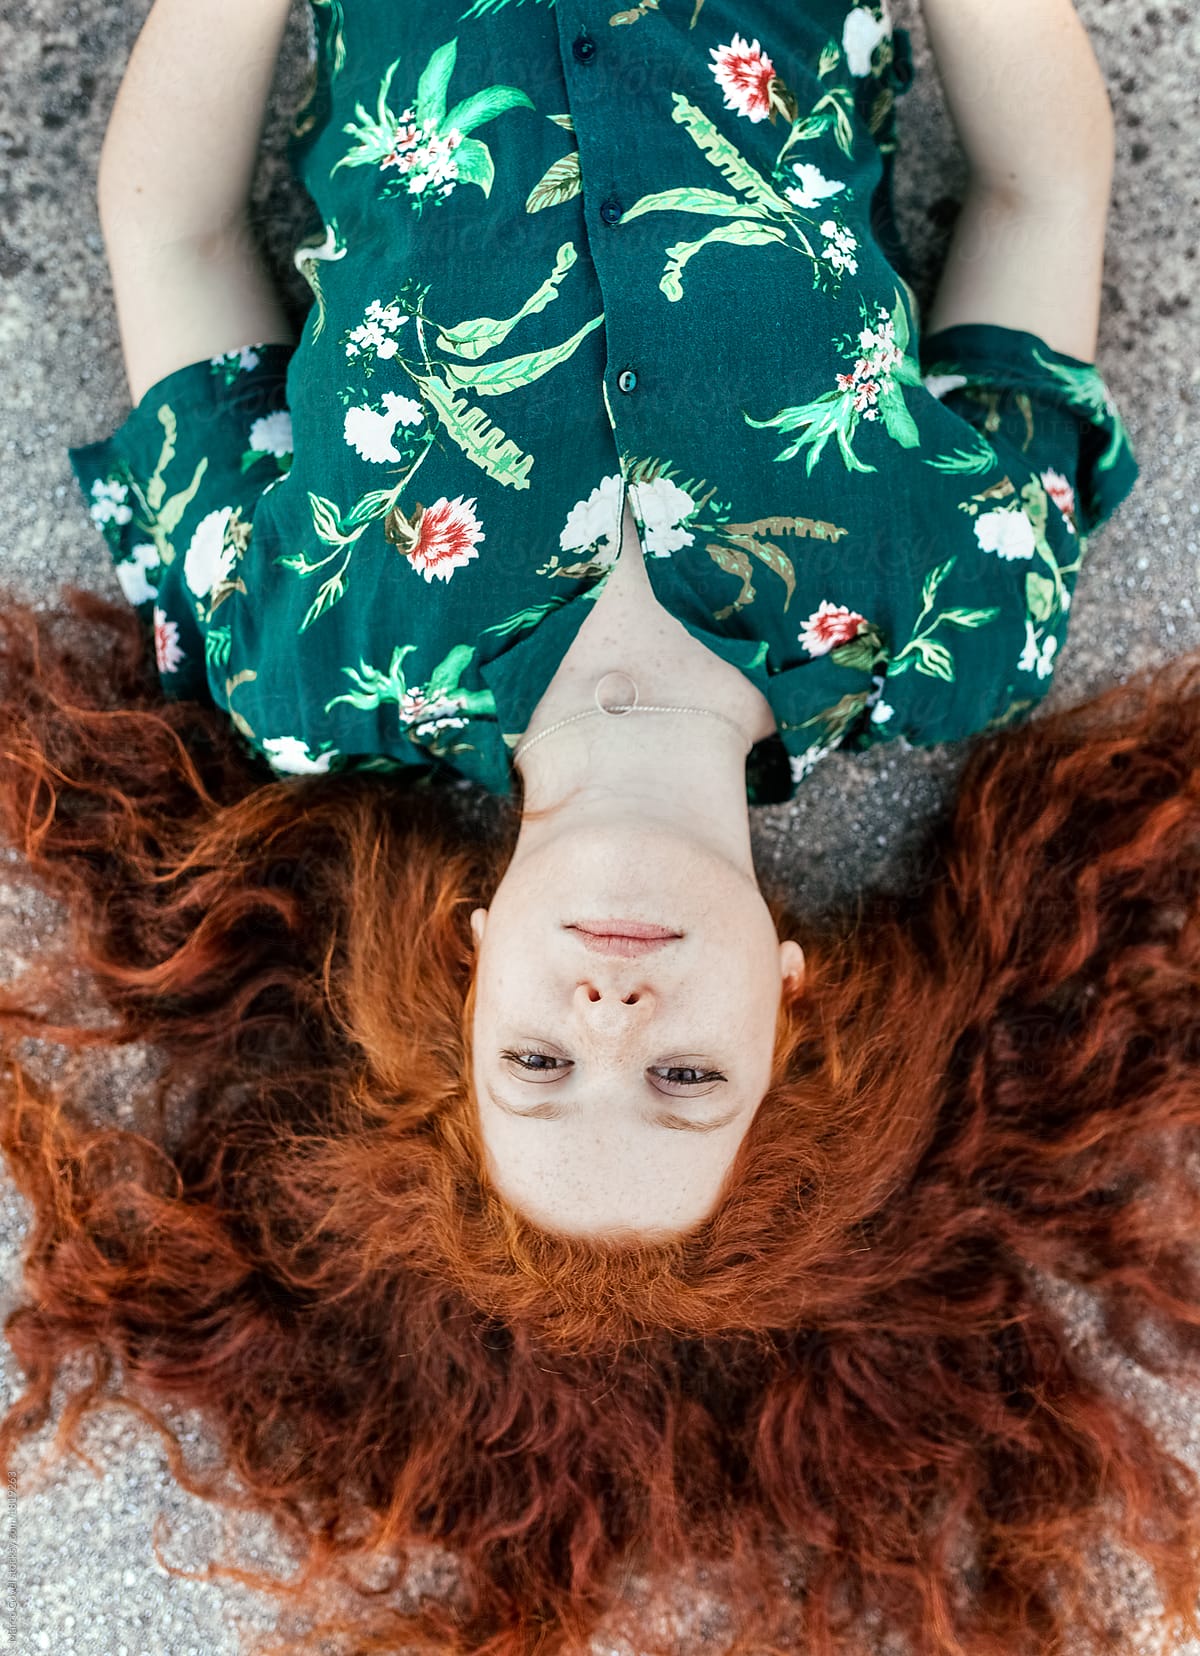 Redhead Young Girl By Stocksy Contributor Marco Govel Stocksy 